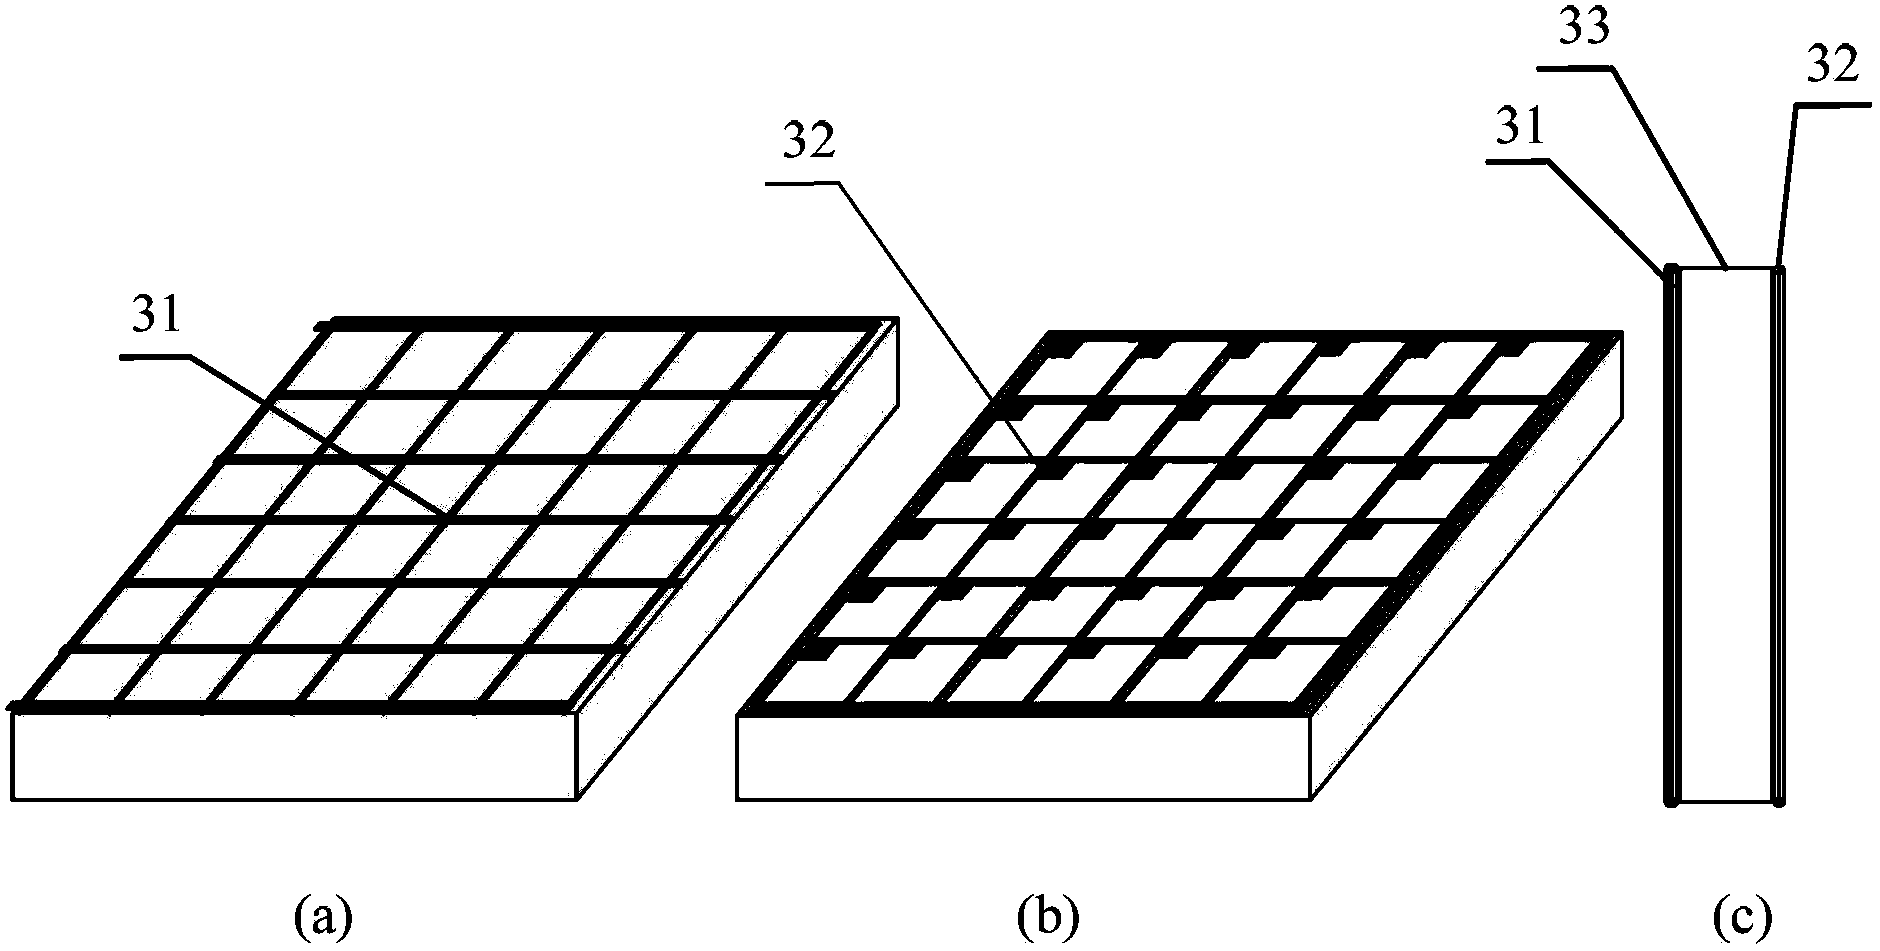 Liquid crystal display panel supporting low-temperature display